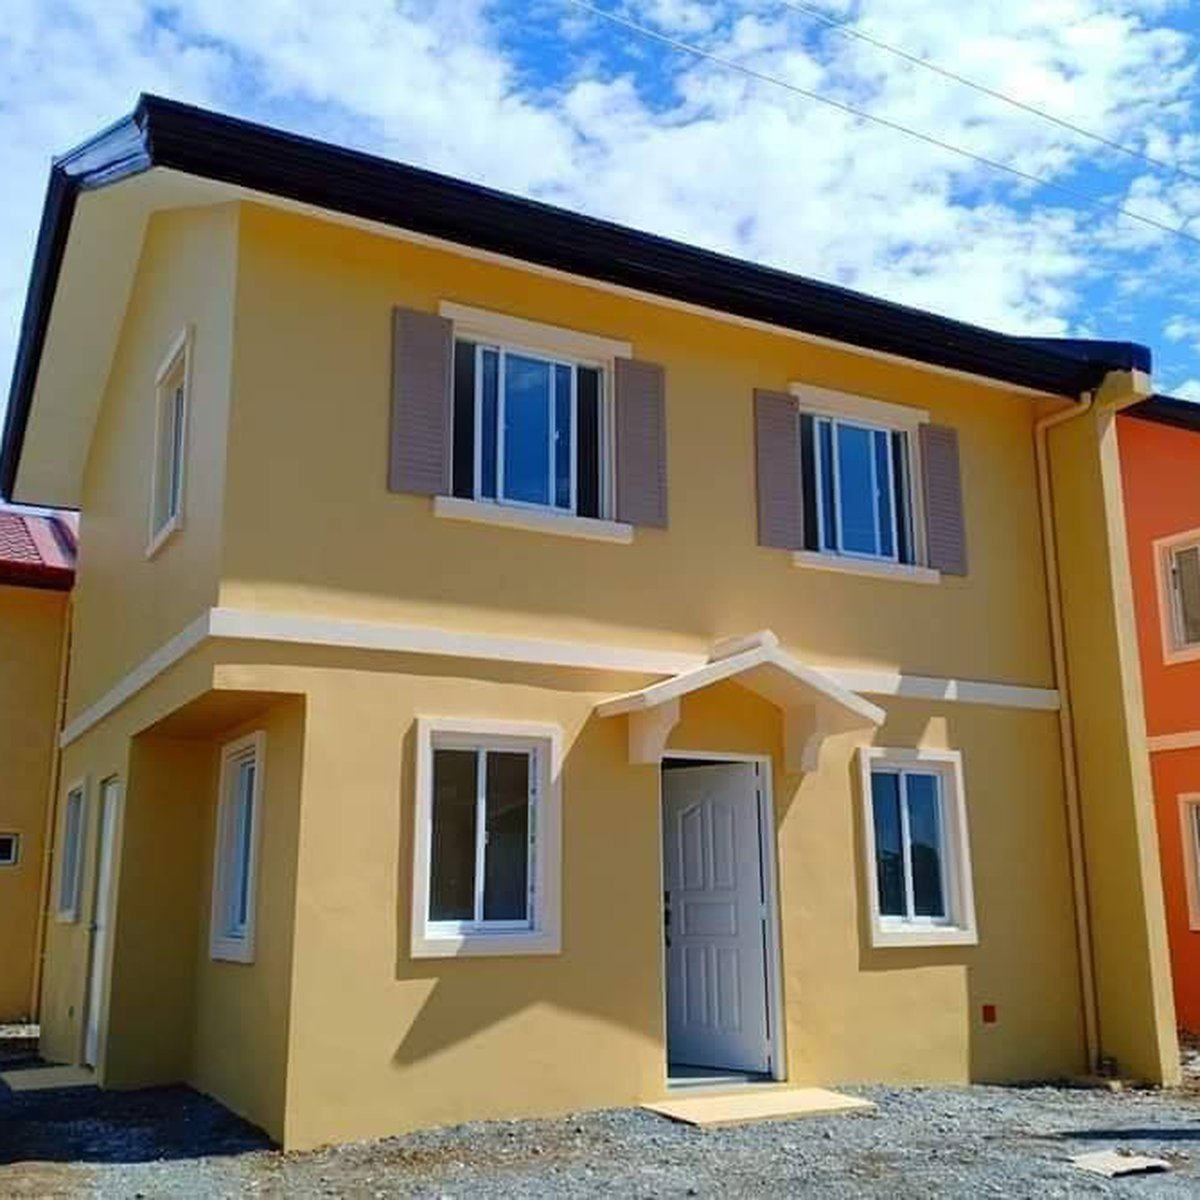 4 Bedroom Single Attached House For Sale in Antipolo Rizal